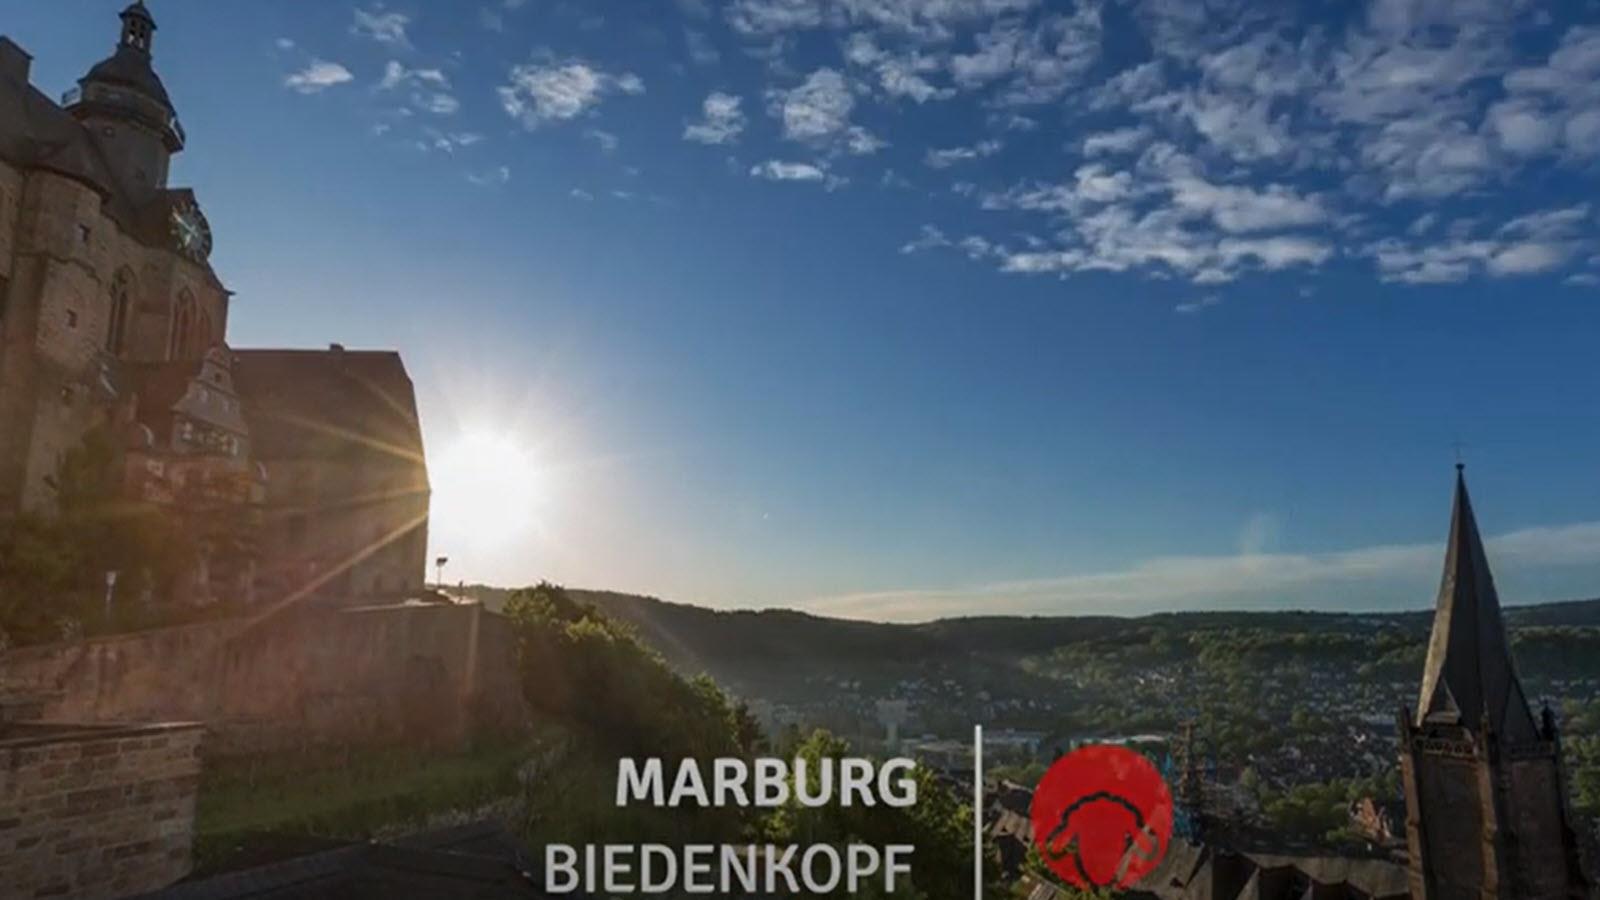 The view from Marburg, Germany, featuring mountains and medieval architecture